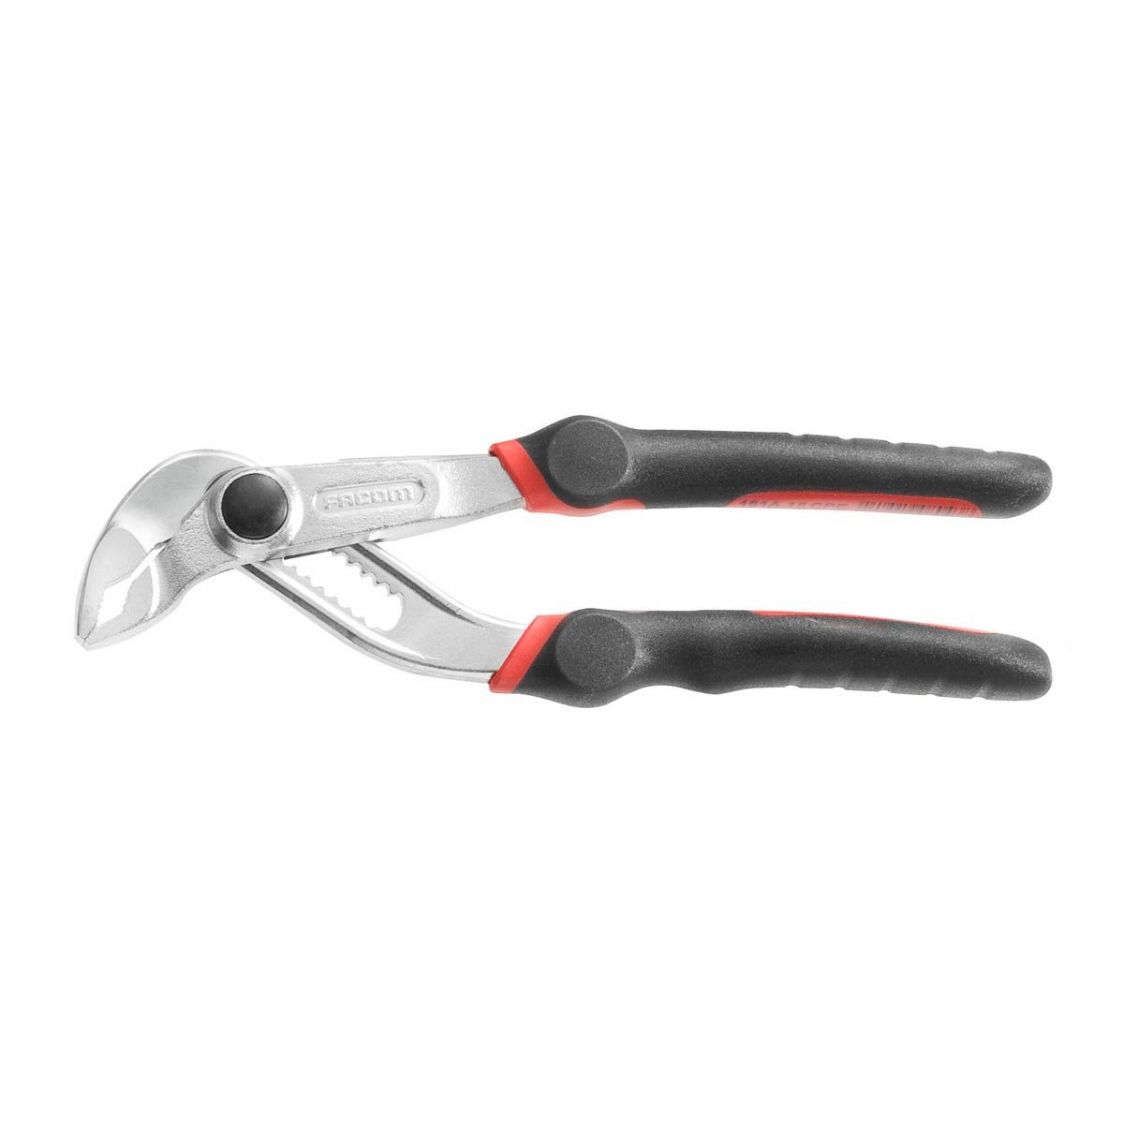 FACOM 181A.XCPE - Slip-Joint Locking Comfort Grip Pliers